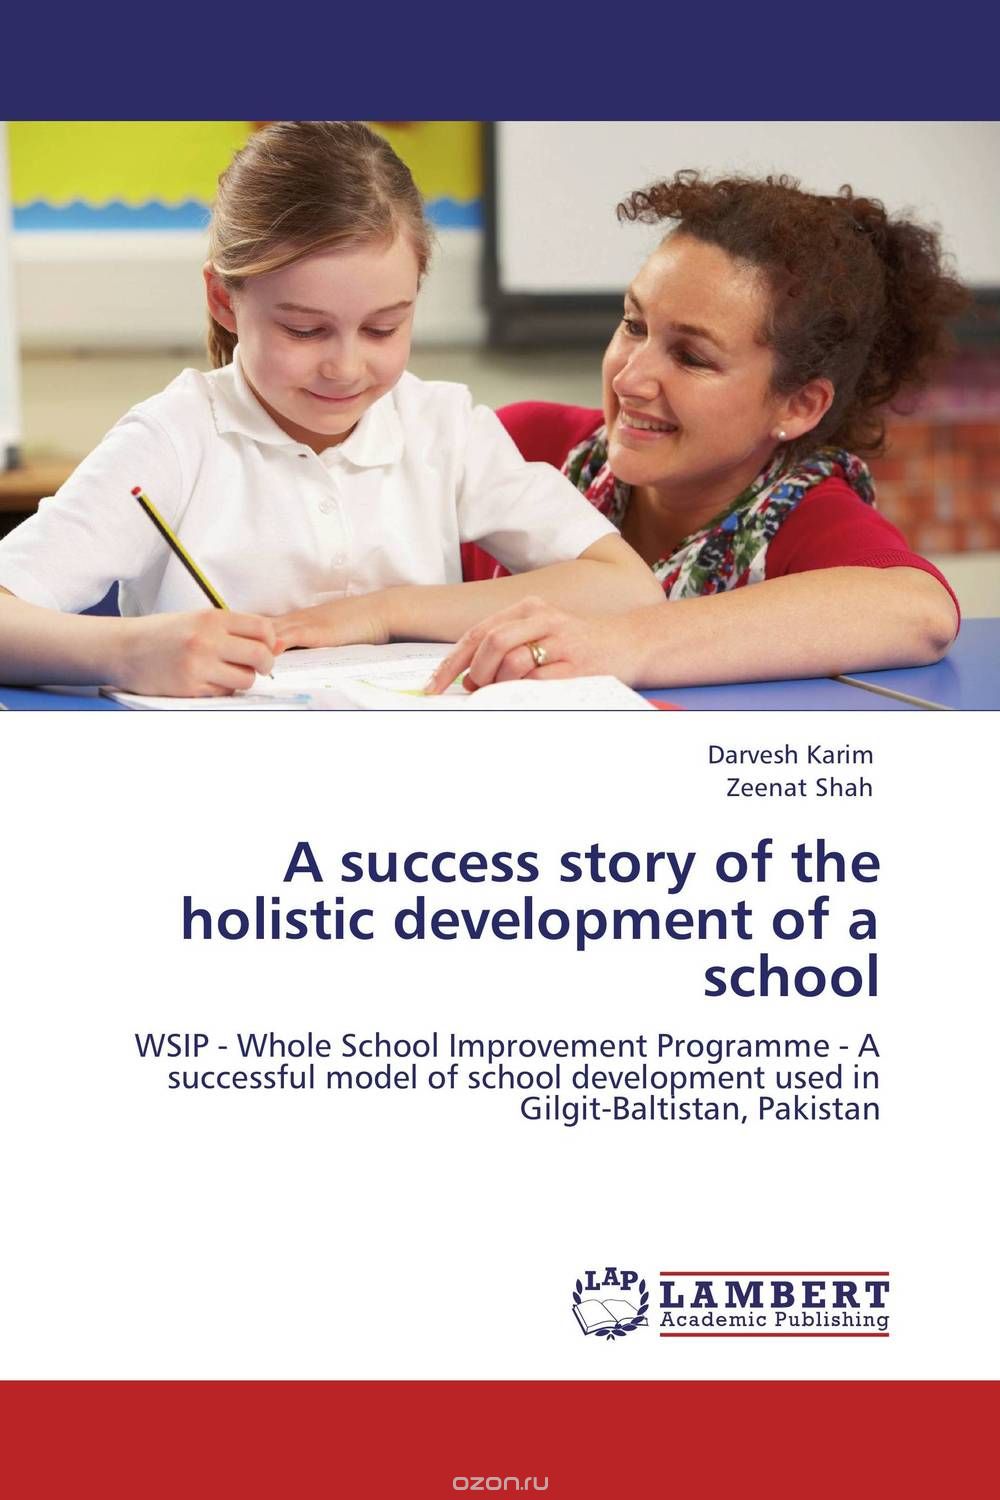 A success story of the holistic development of a school